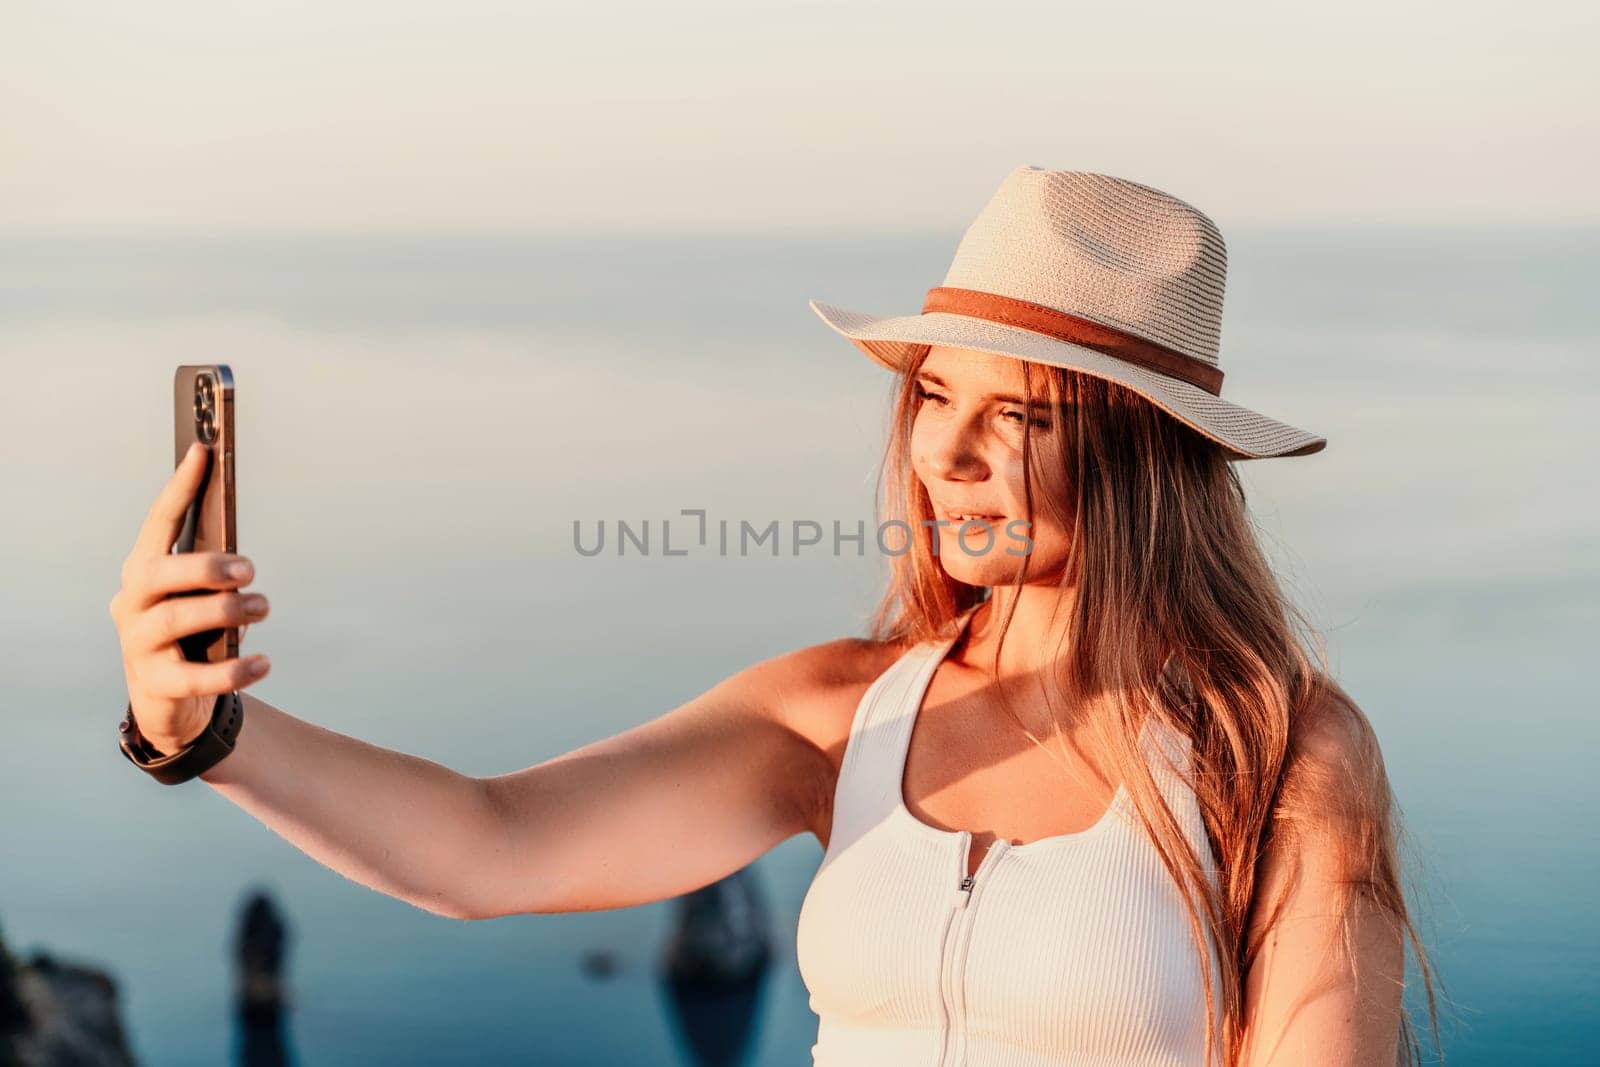 Selfie woman in hat, white tank top and shorts makes selfie shot mobile phone post photo social network outdoors on sea background beach people vacation lifestyle travel concept. by Matiunina